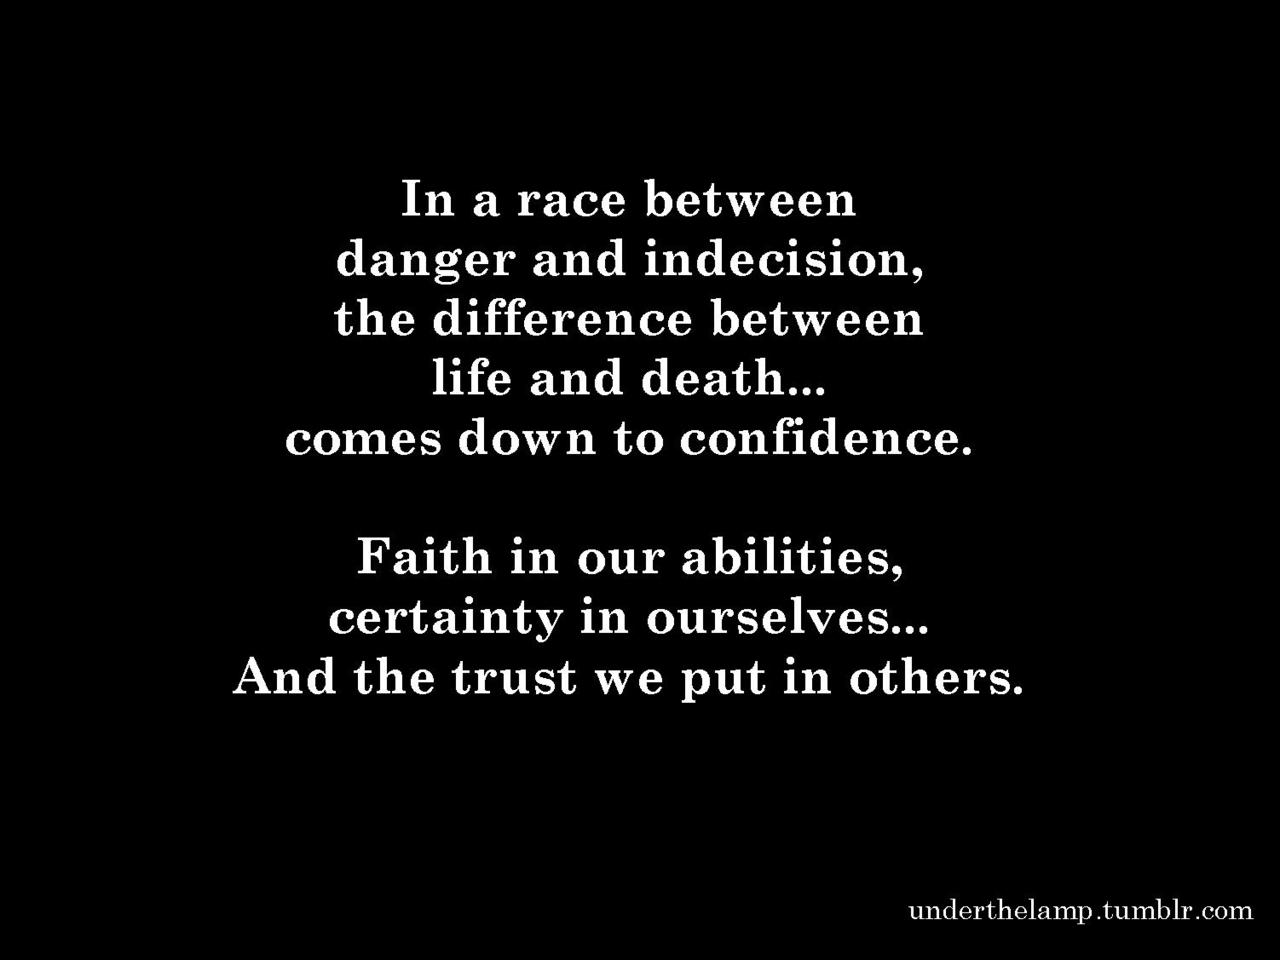 In a race between danger and indecision, the difference between life and death comes down to confidence. Faith in our abilities, certainty in ourselves and the trust we put in others.